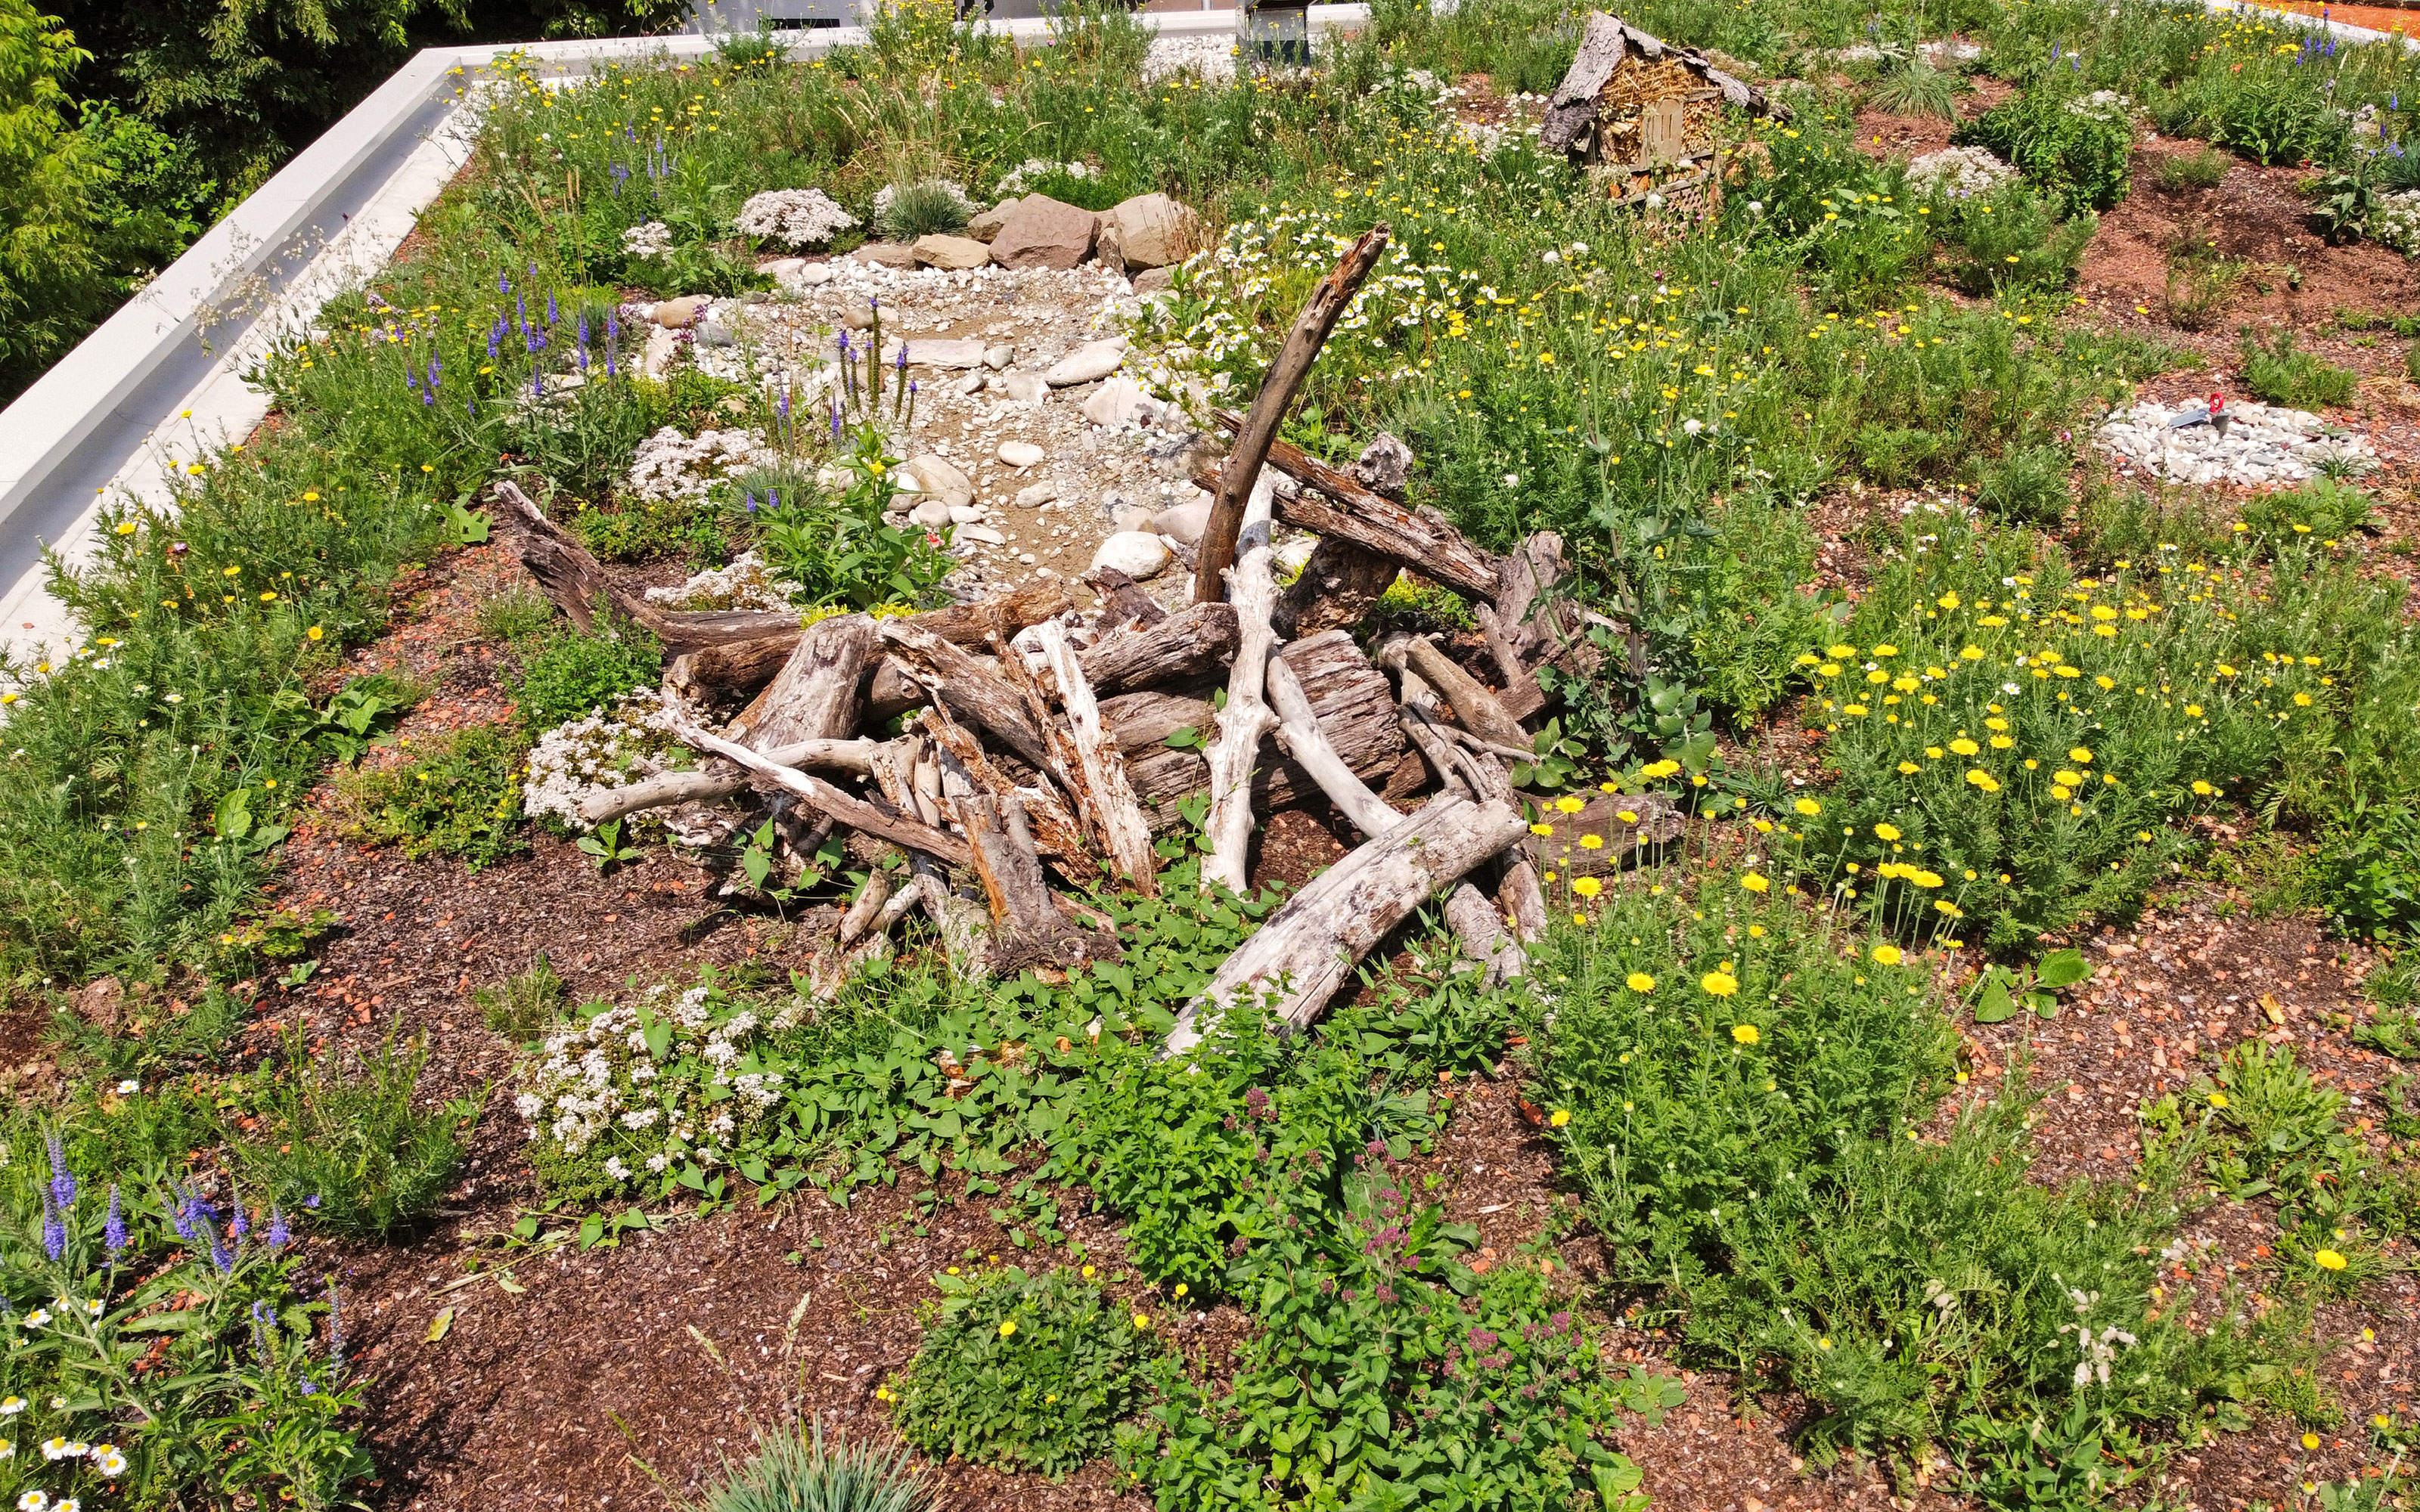 Green roof with deadwood and stony areas